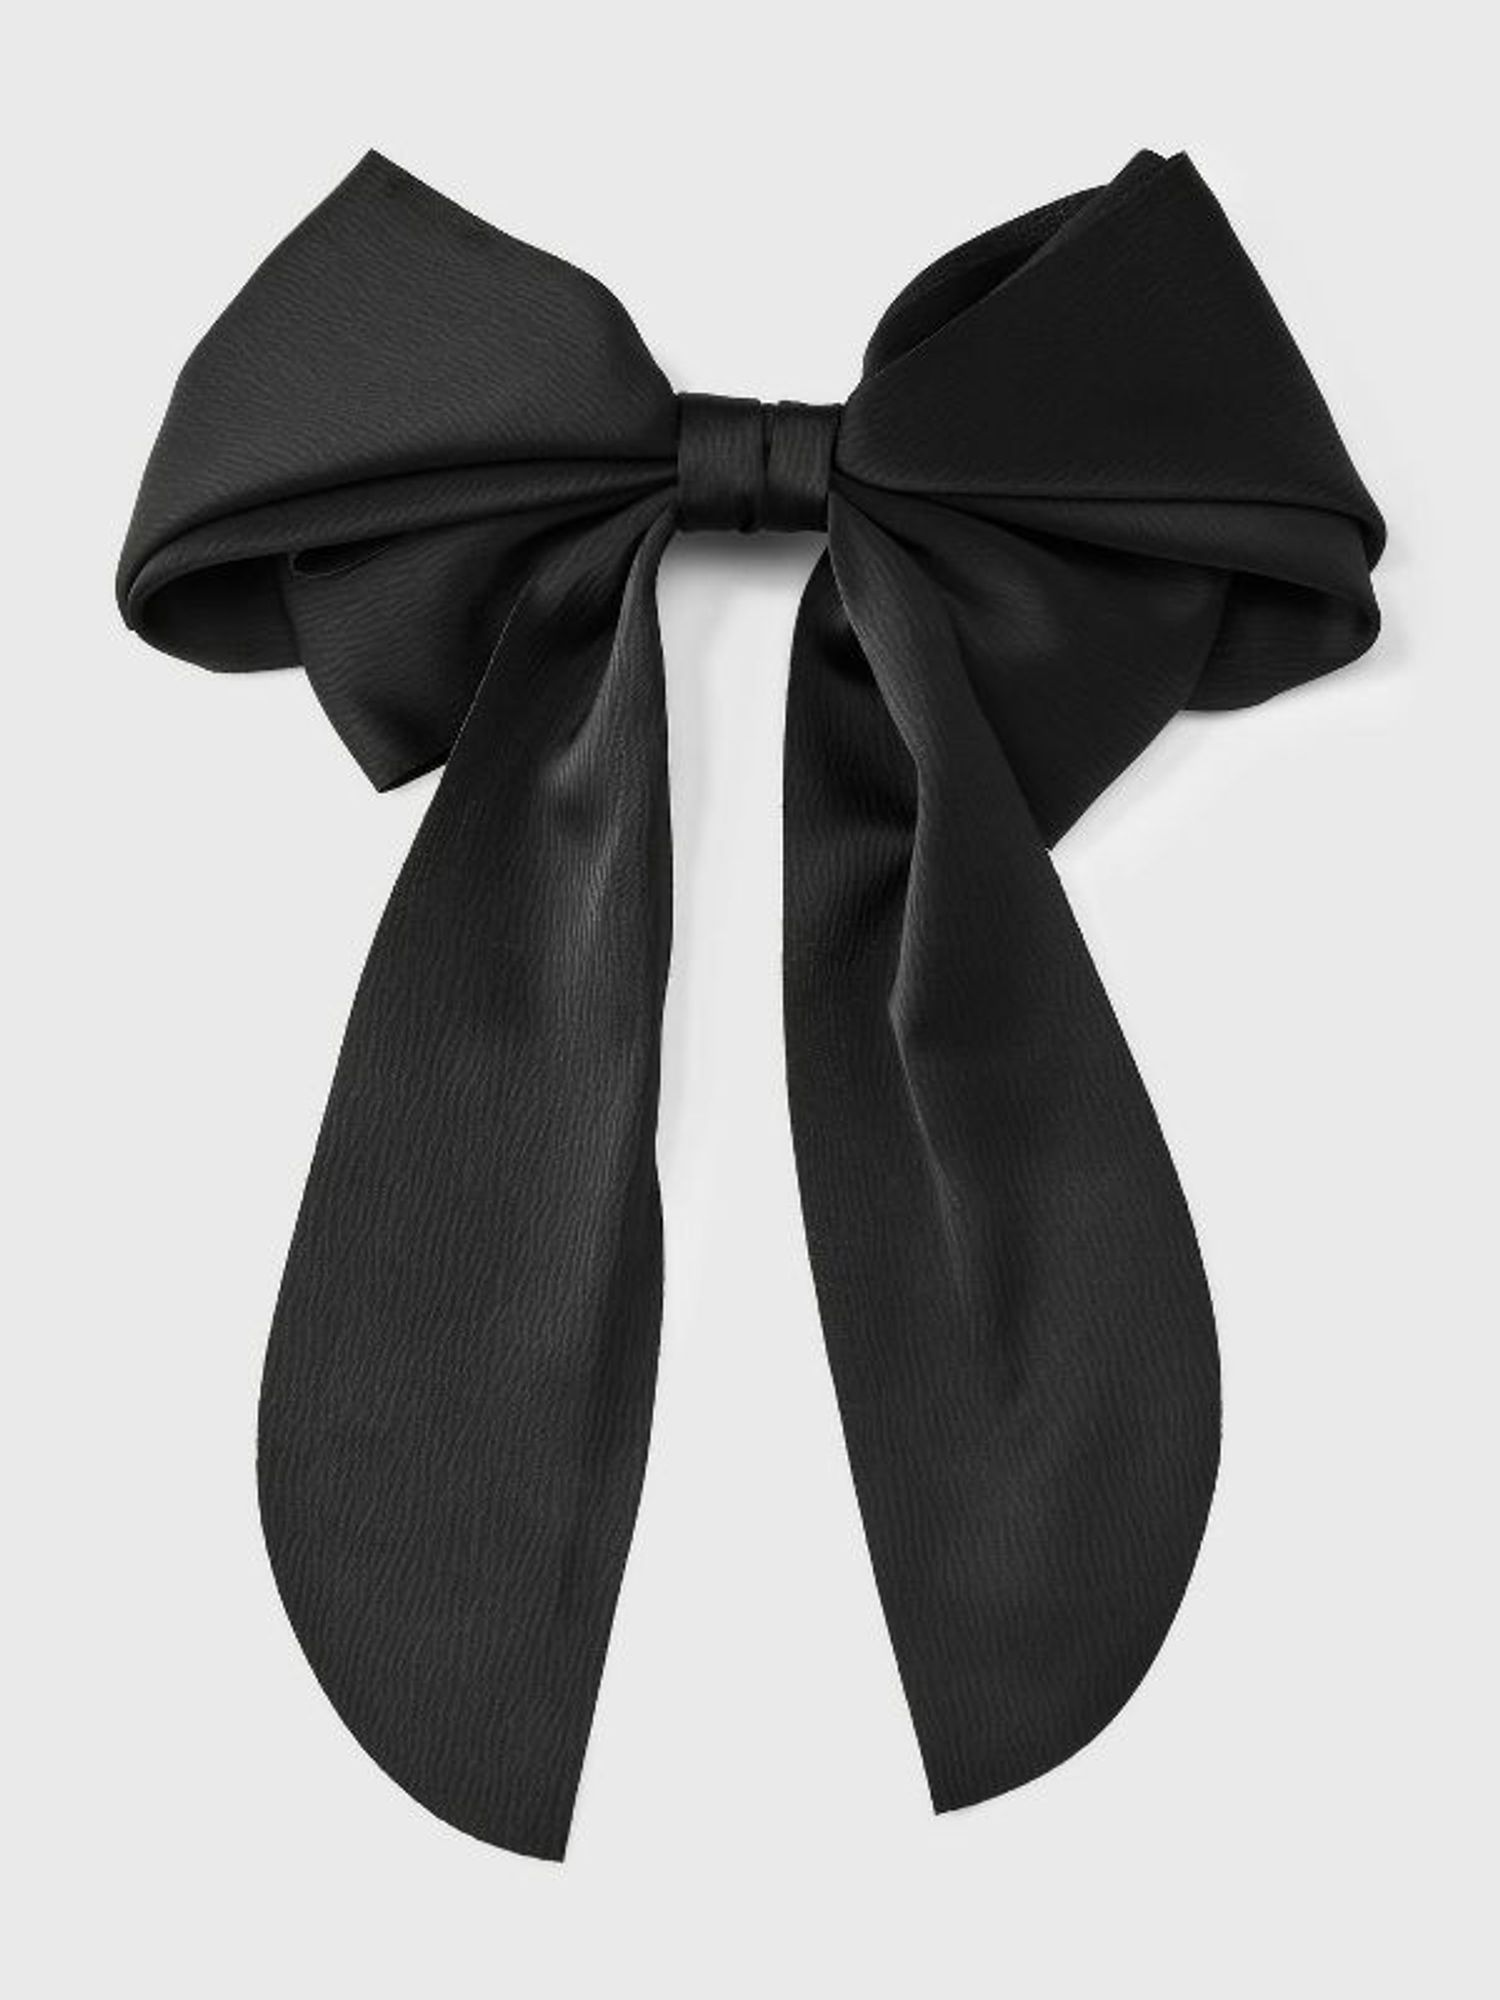 20 Adorable Bows For Hair To Wear With Everything - Brit + Co